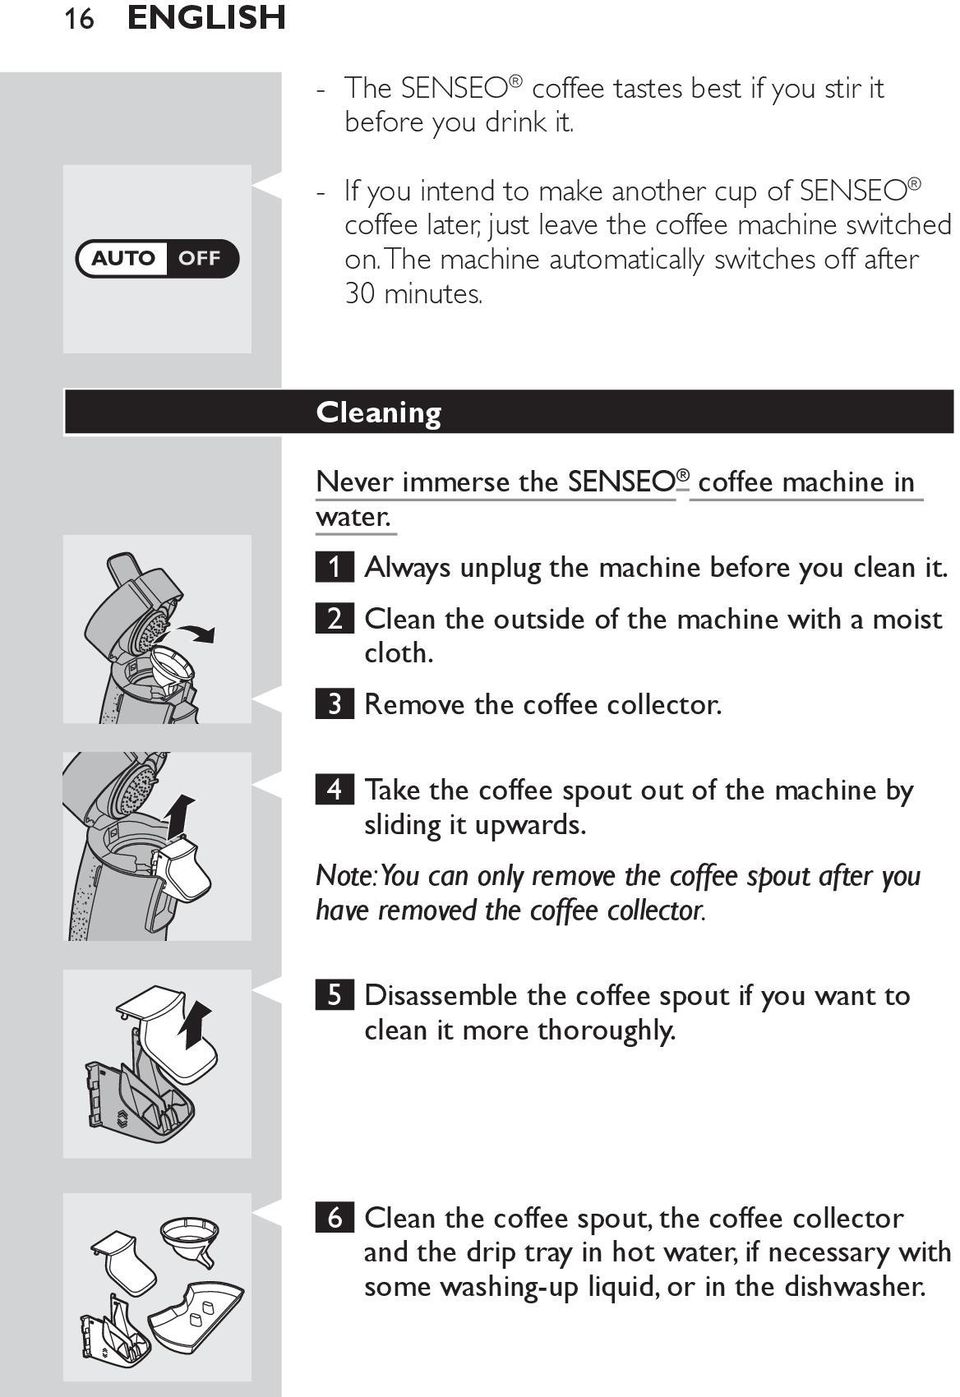 2 Clean the outside of the machine with a moist cloth. 3 Remove the coffee collector. 4 Take the coffee spout out of the machine by sliding it upwards.